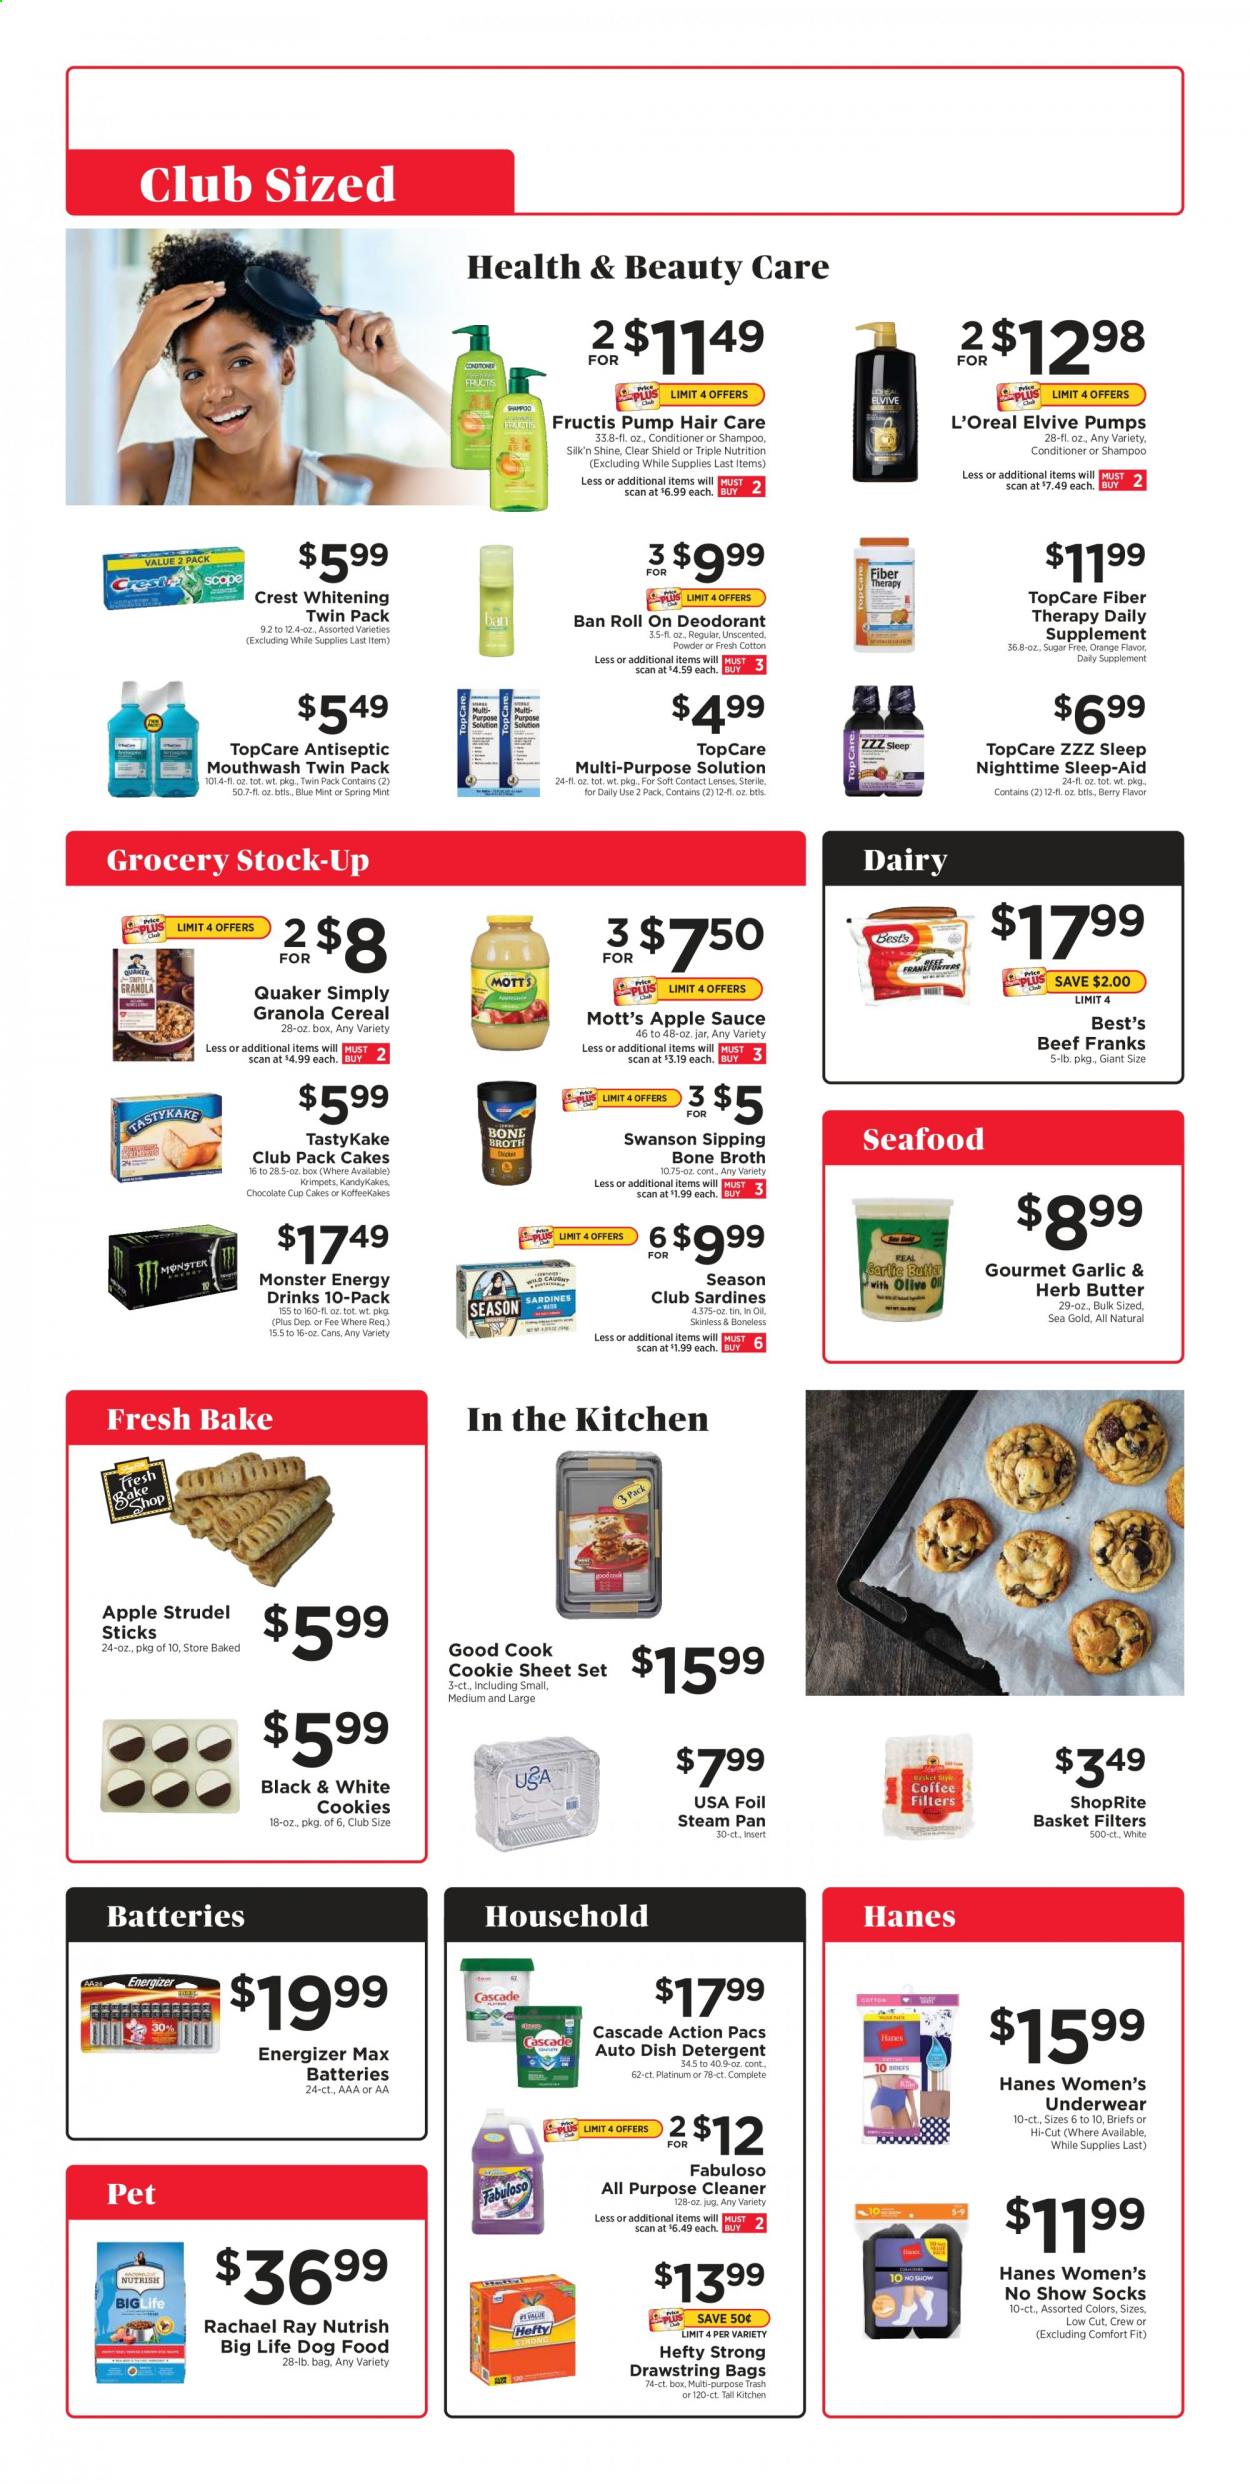 thumbnail - ShopRite Flyer - 04/25/2021 - 05/22/2021 - Sales products - strudel, oranges, Mott's, sardines, seafood, sauce, Quaker, Silk, butter, cookies, chocolate, broth, cereals, granola, apple sauce, energy drink, Monster, Monster Energy, detergent, cleaner, all purpose cleaner, Fabuloso, Cascade, shampoo, mouthwash, Crest, L’Oréal, conditioner, Fructis, anti-perspirant, roll-on, deodorant, Hefty, pan, foil steam pan, battery, Energizer, animal food, dog food, Nutrish, socks. Page 1.